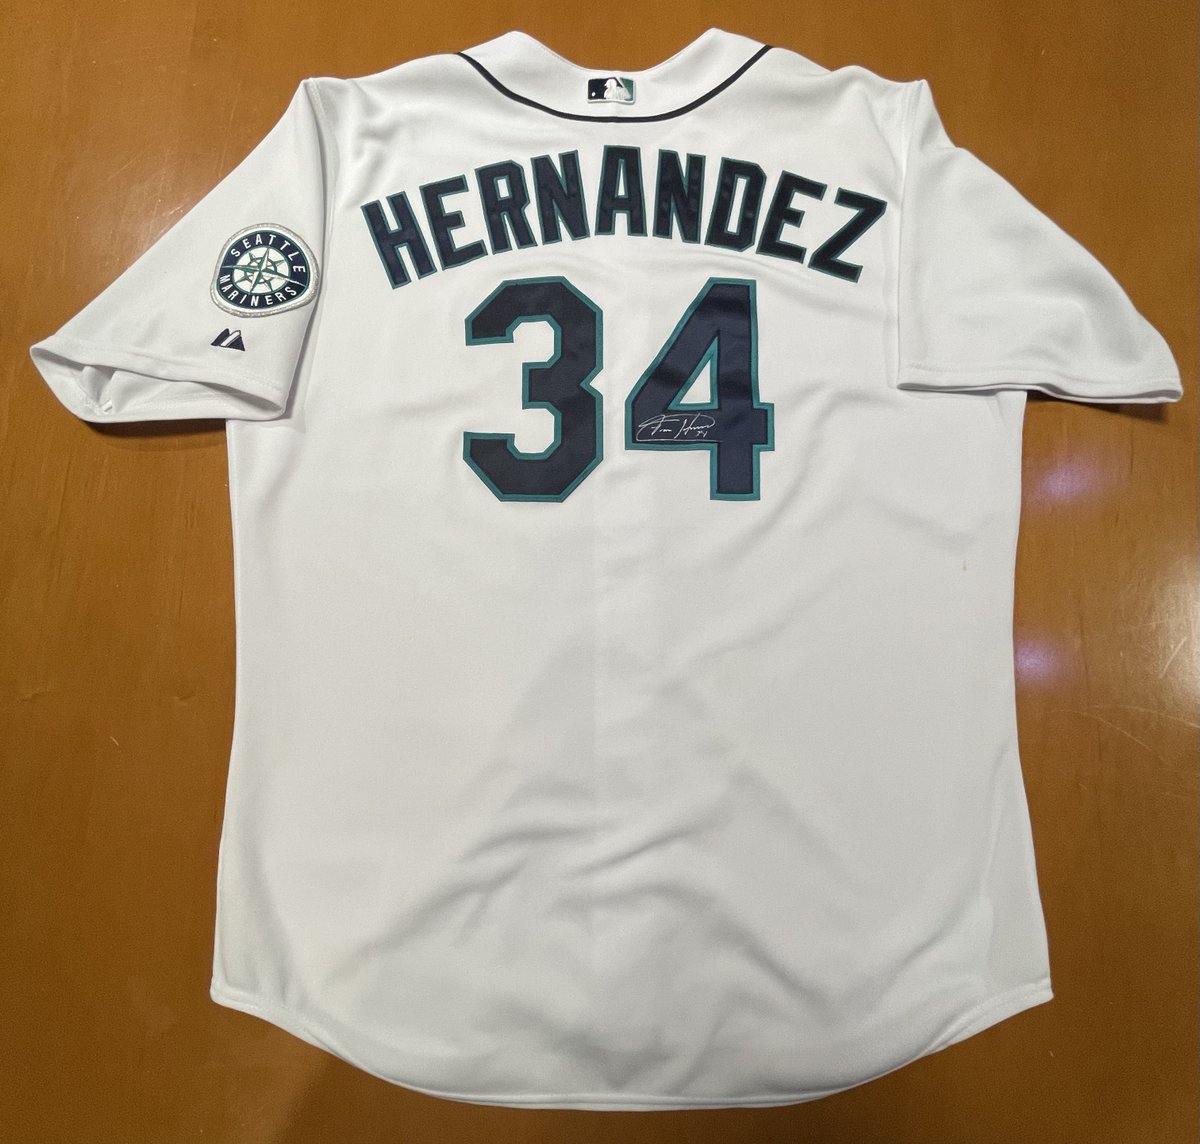 MAJESTIC SEATTLE MARINERS TEAM ISSUED GAME USED #69 BATTING JERSEY